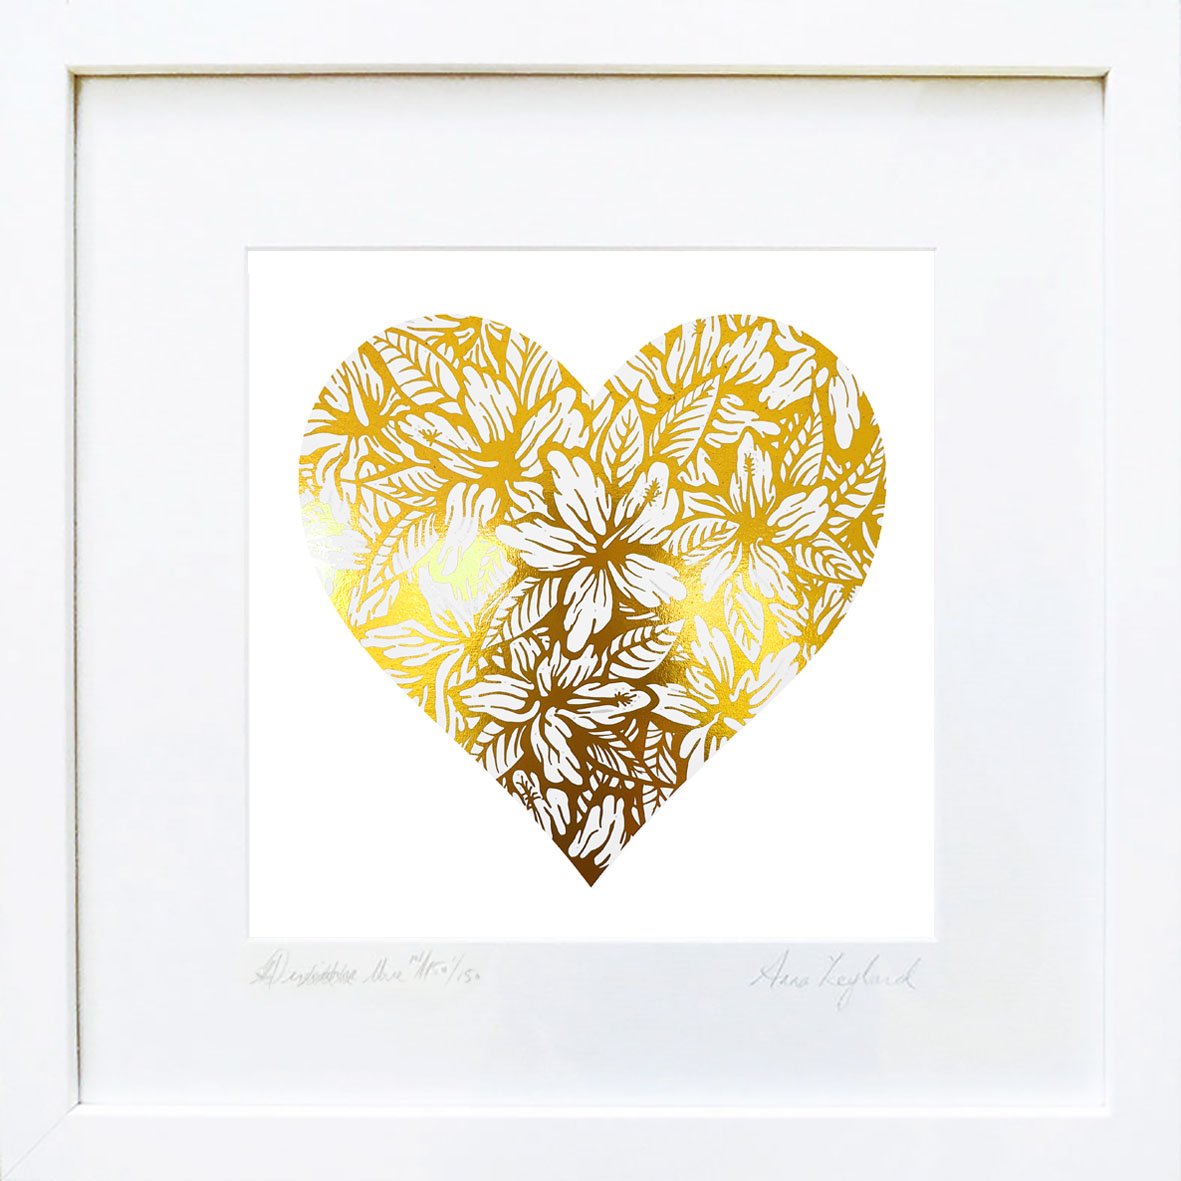 Image of A Little Love V' & 'A Little Kiss V' in Gold